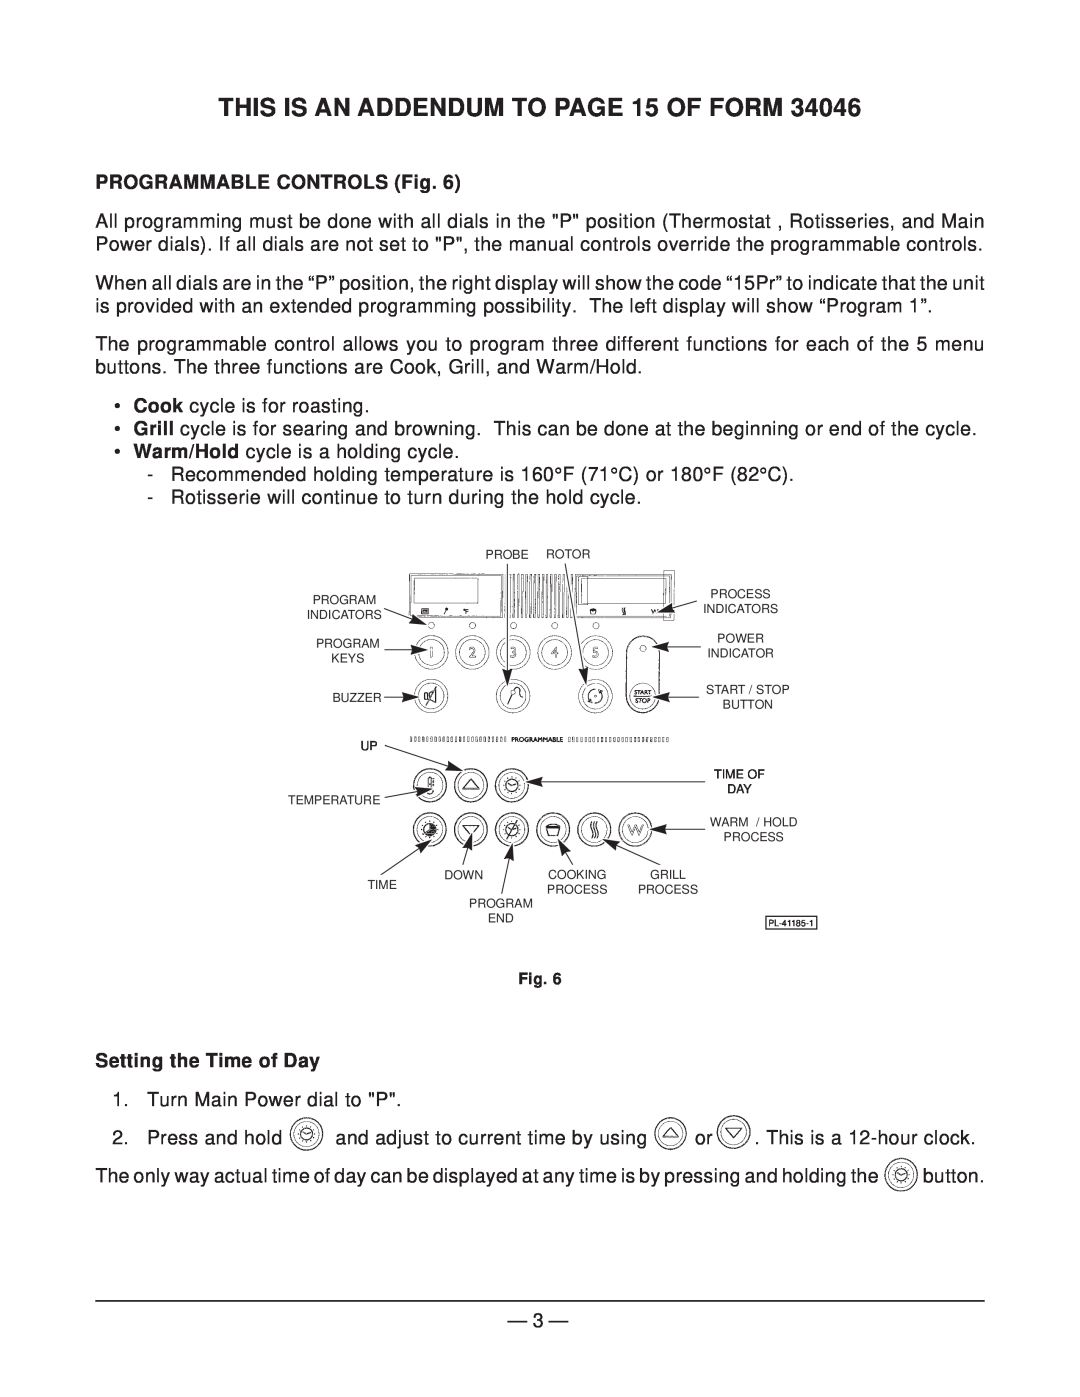 Hobart HR5 instruction manual THIS IS AN ADDENDUM TO PAGE 15 OF FORM, PROGRAMMABLE CONTROLS Fig, Setting the Time of Day 